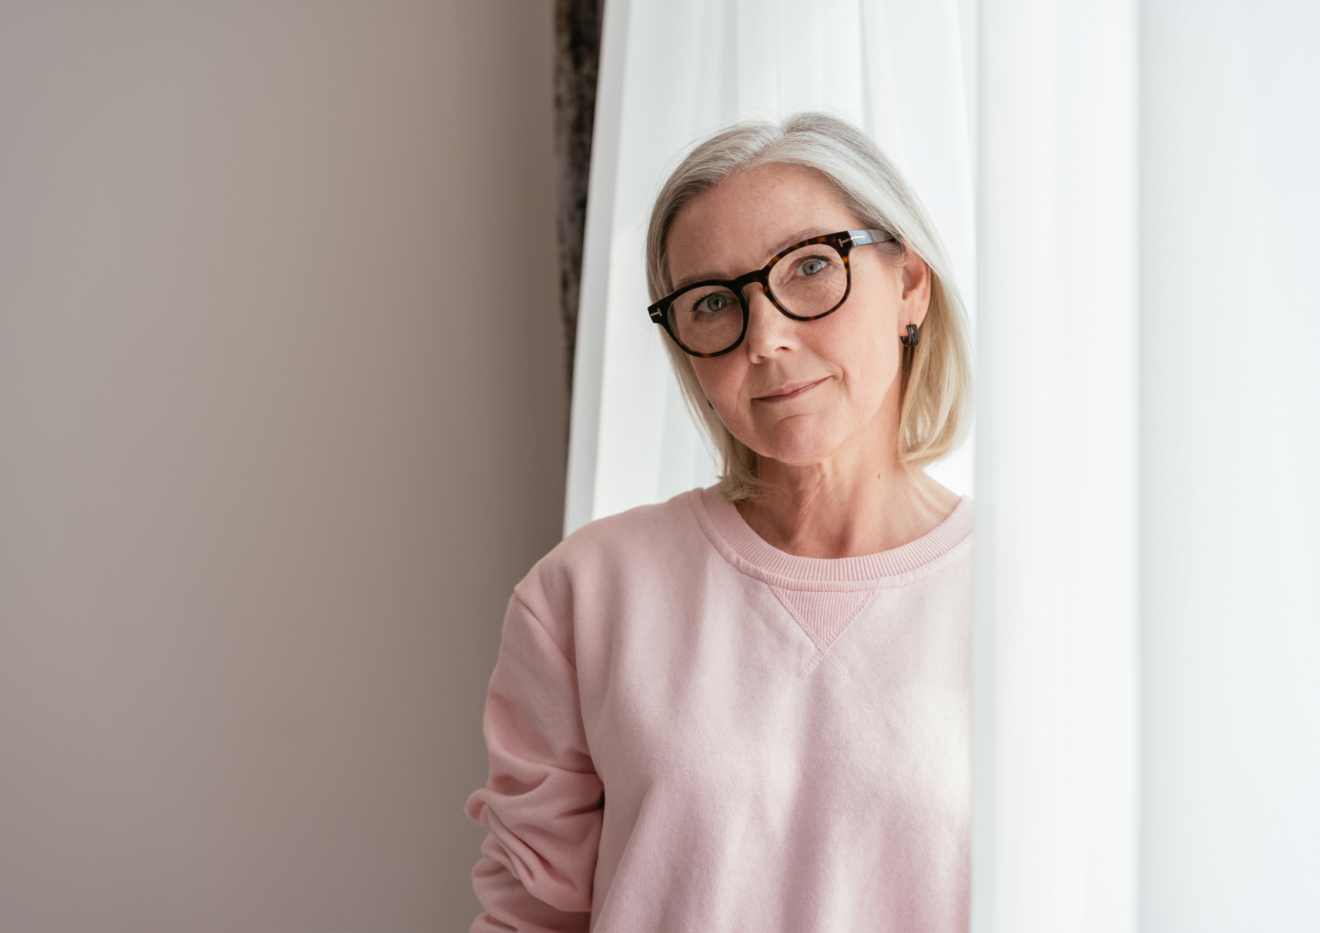 Woman with light grey hair and wearing glasses and pink jumper standing partially in the curtains next to a window